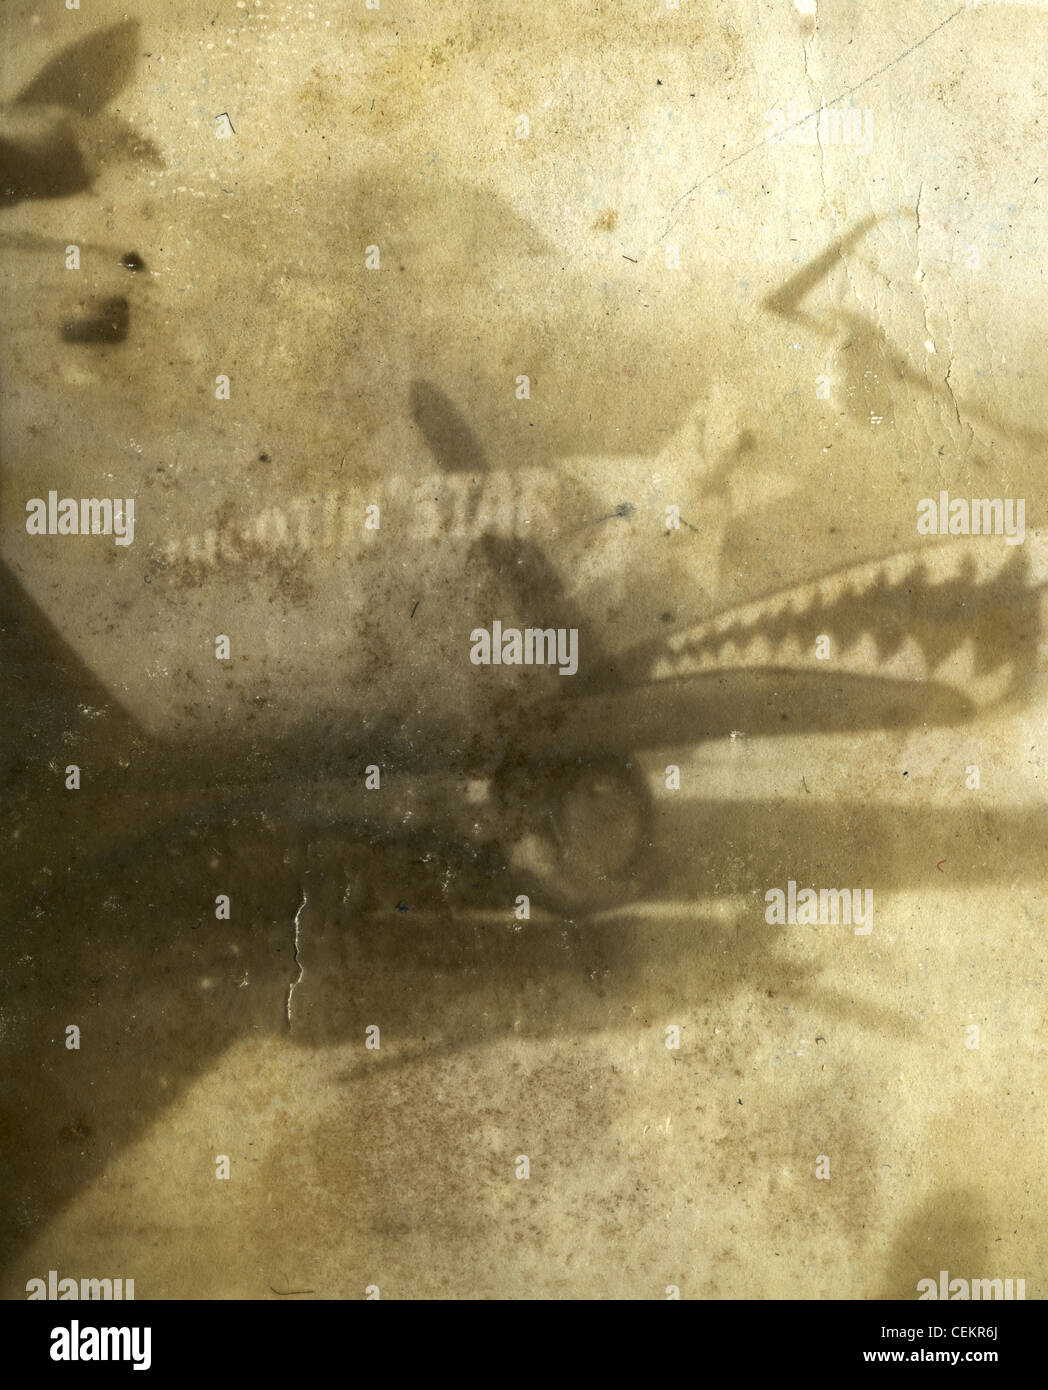 308th Bomb Group, 14th Army Air Force, China Burma India, World War II WWII. shootin' star nose art B 24 airplane bomber Stock Photo